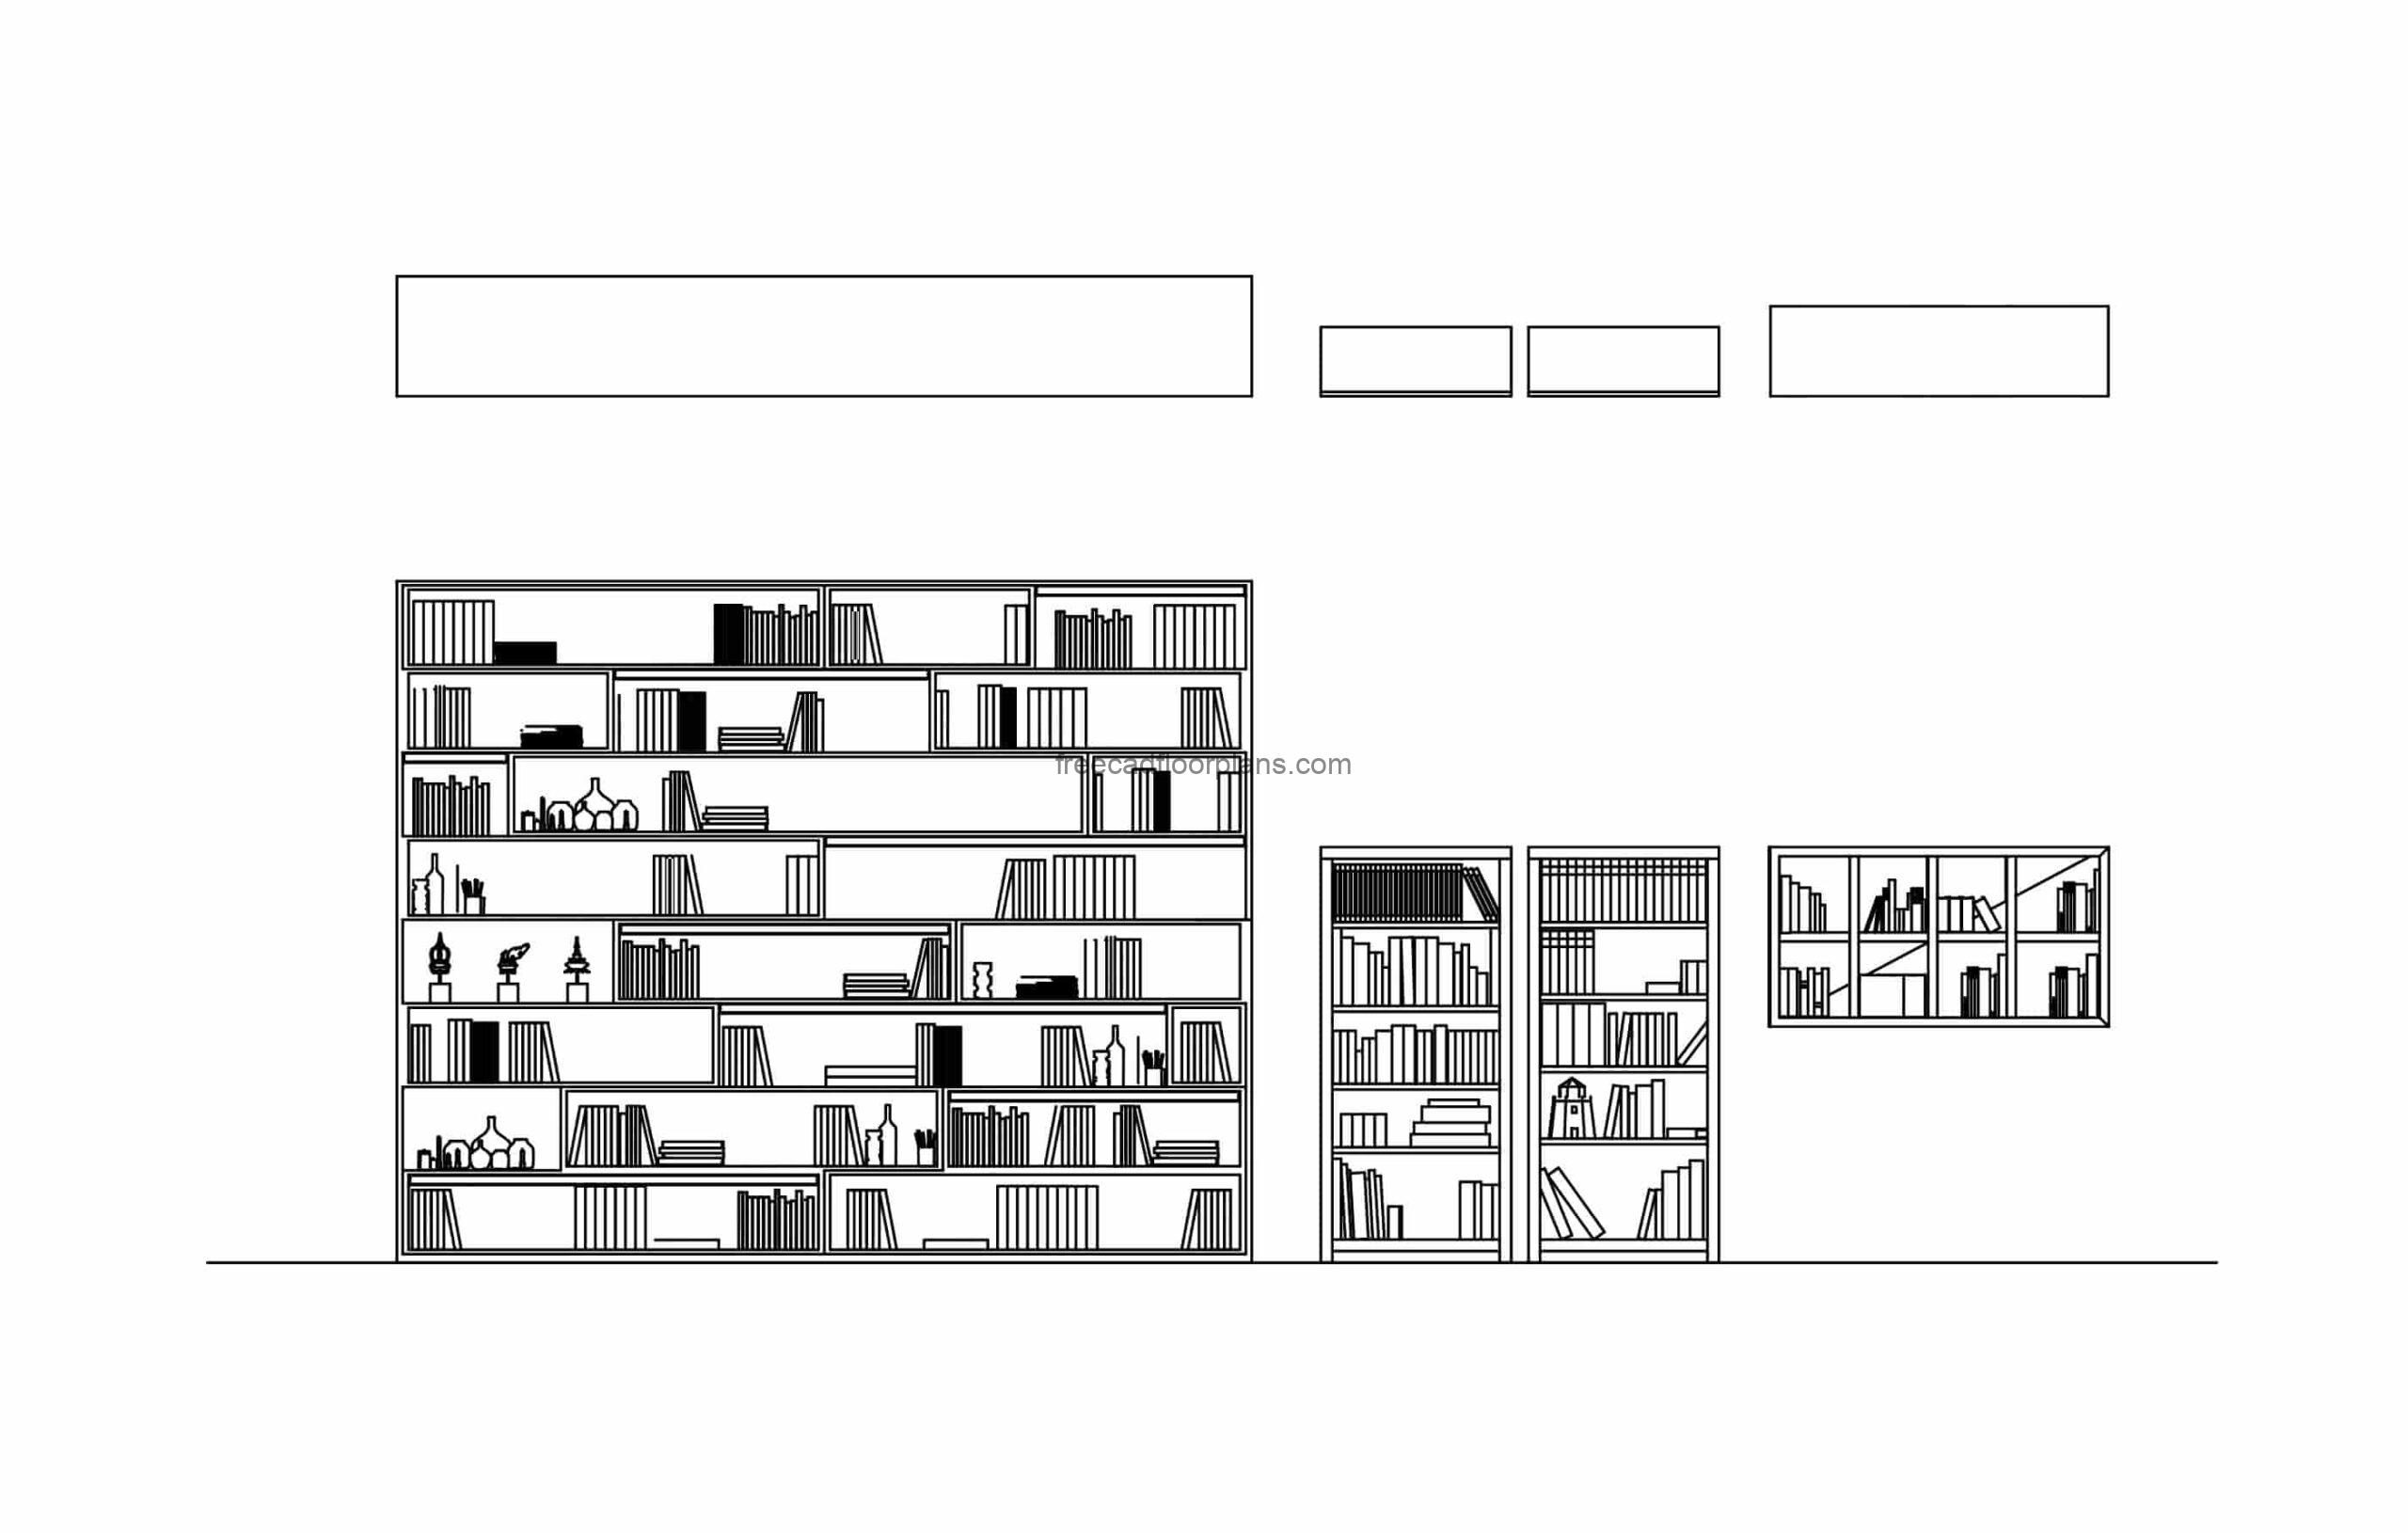 autocad block drawing of bookshelves plan and elevations 2d views file for free download dwg model